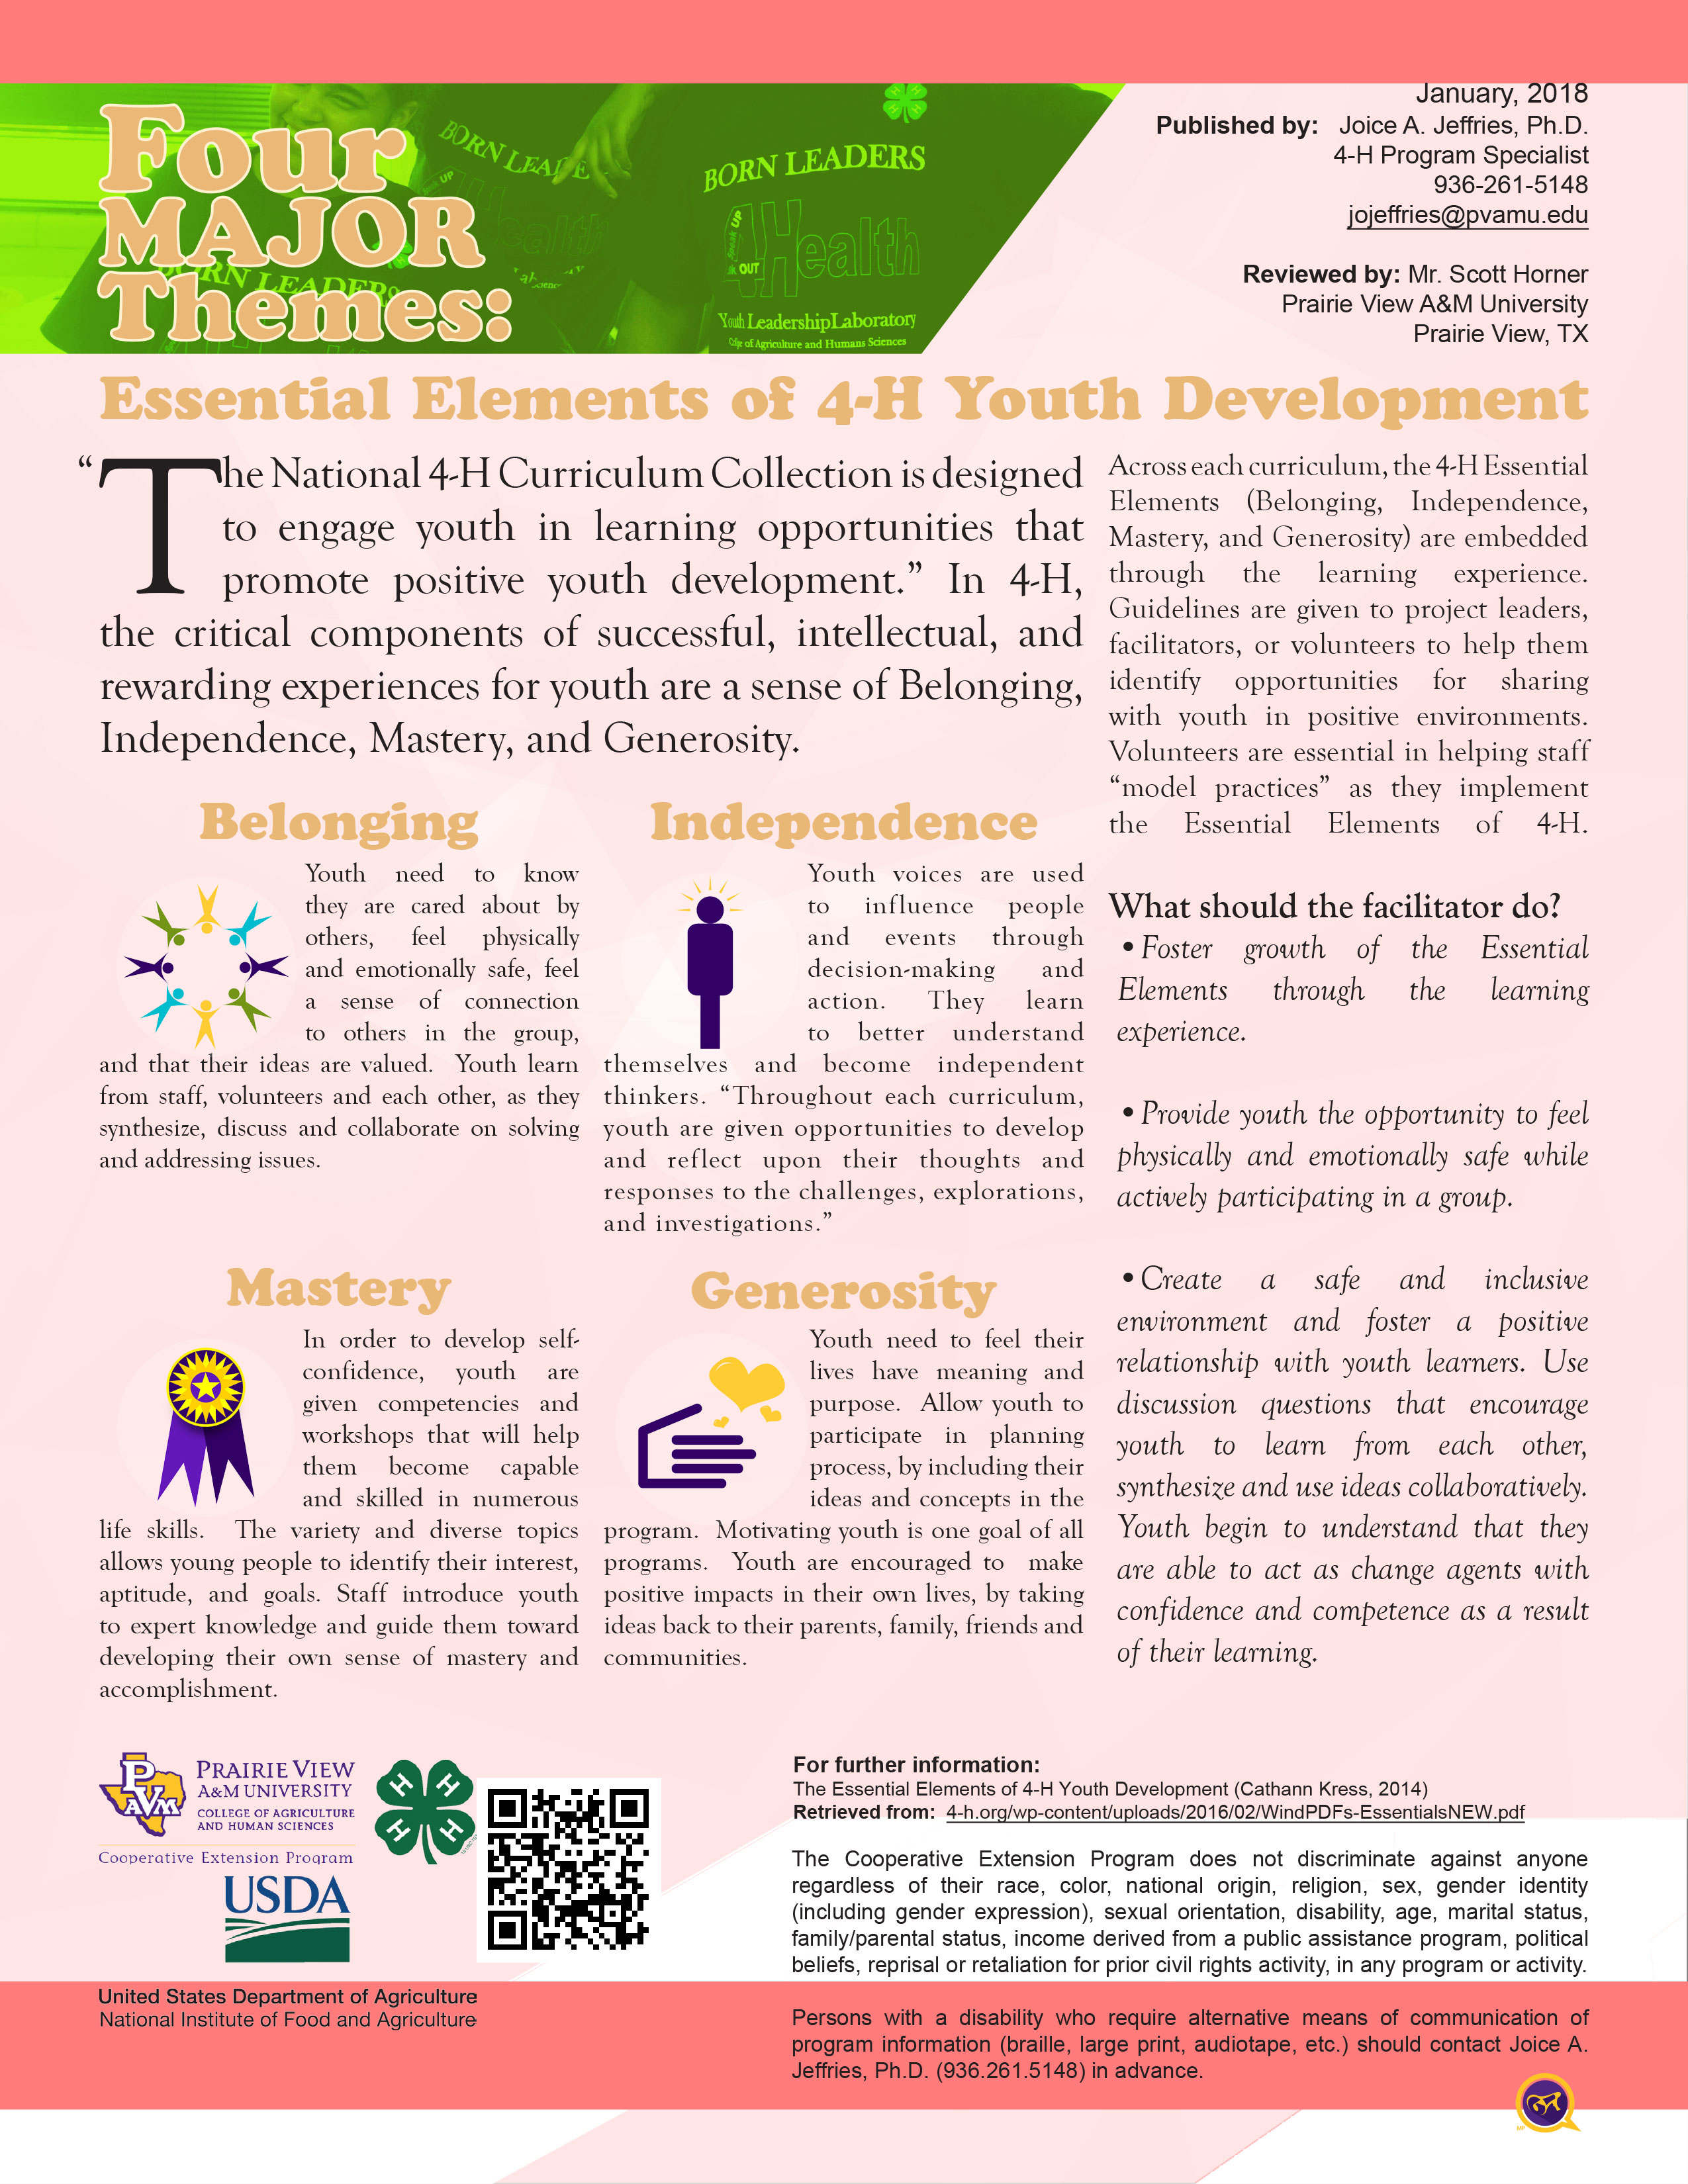 Essential Elements of 4-H Youth Development